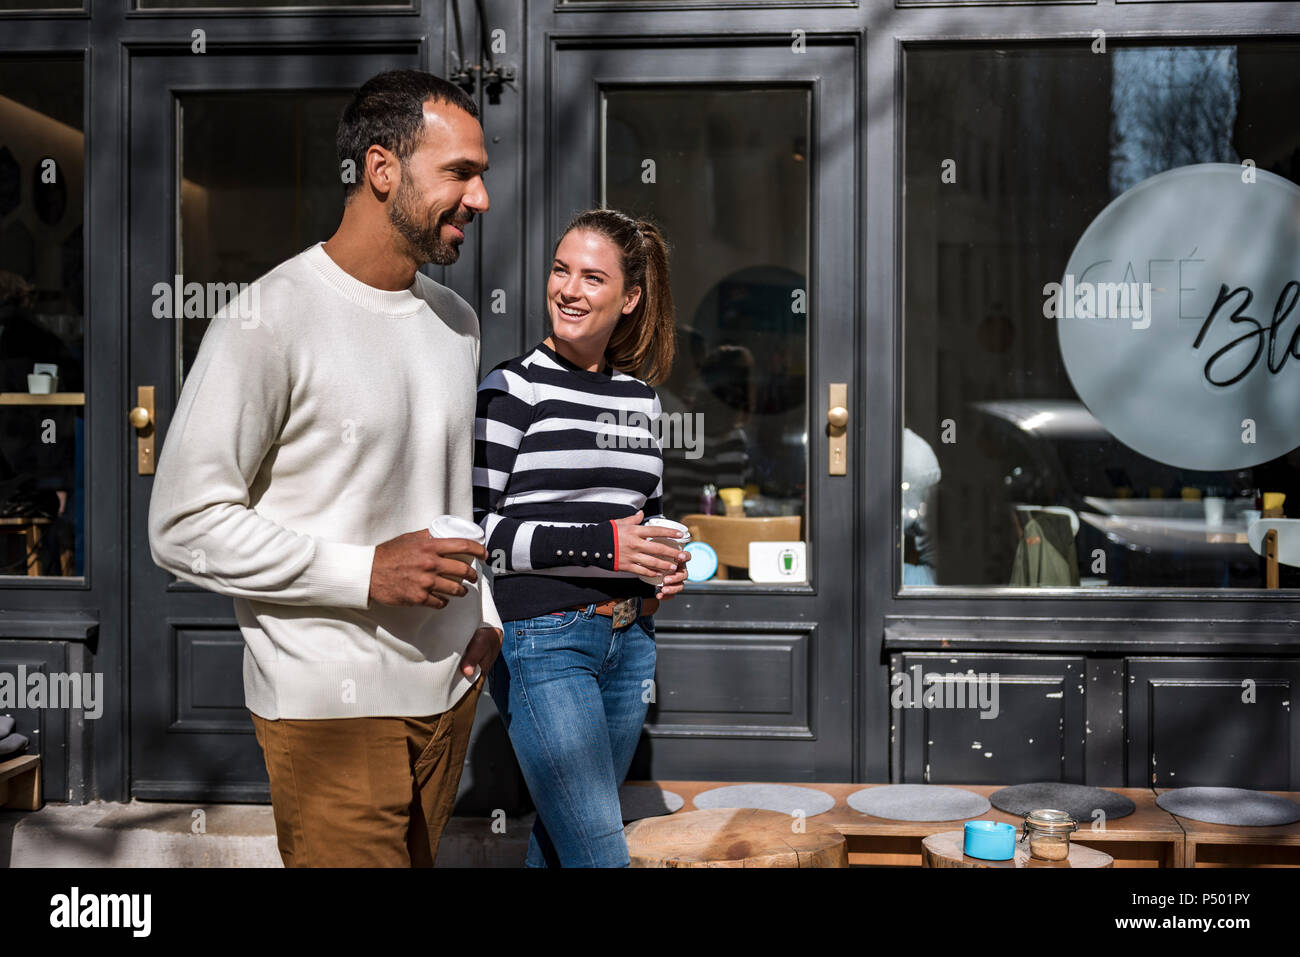 Man and woman with takeaway cups walking outside a cafe Stock Photo